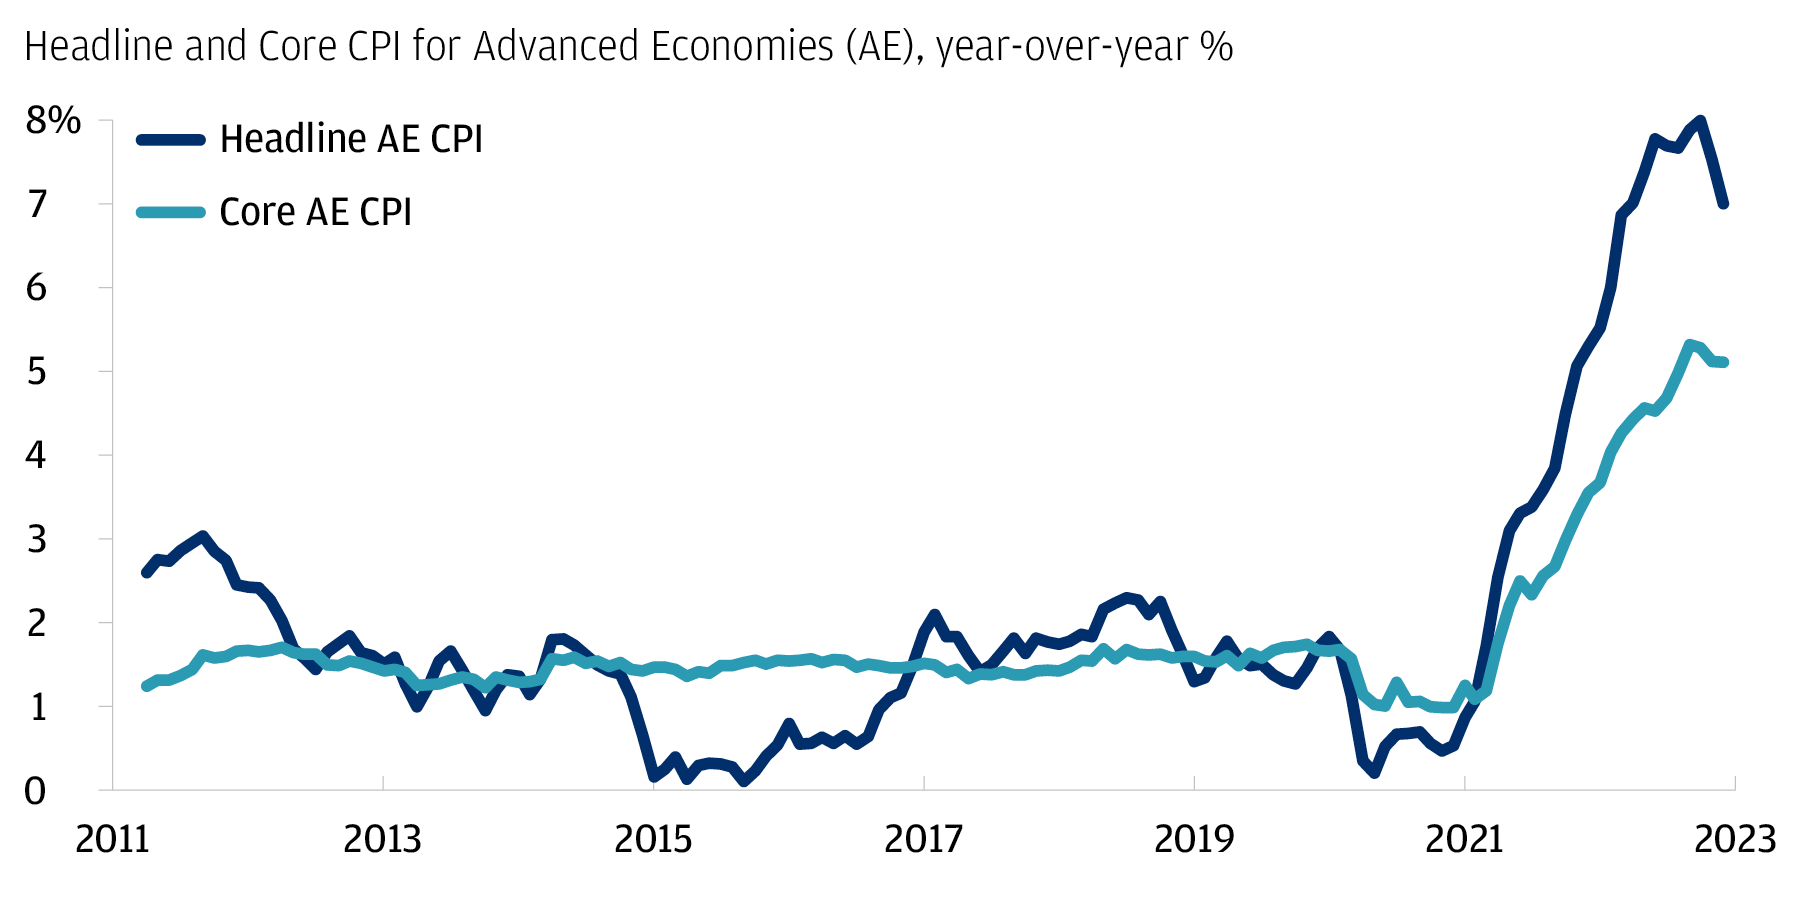 Line chart of Advanced Economies (AE) year-over-year headline and core consumer price inflation (CPI) since 2011 through December 2022. It shows sizable increases beginning in 2021 and most recently, both headline and core CPI have peaked.